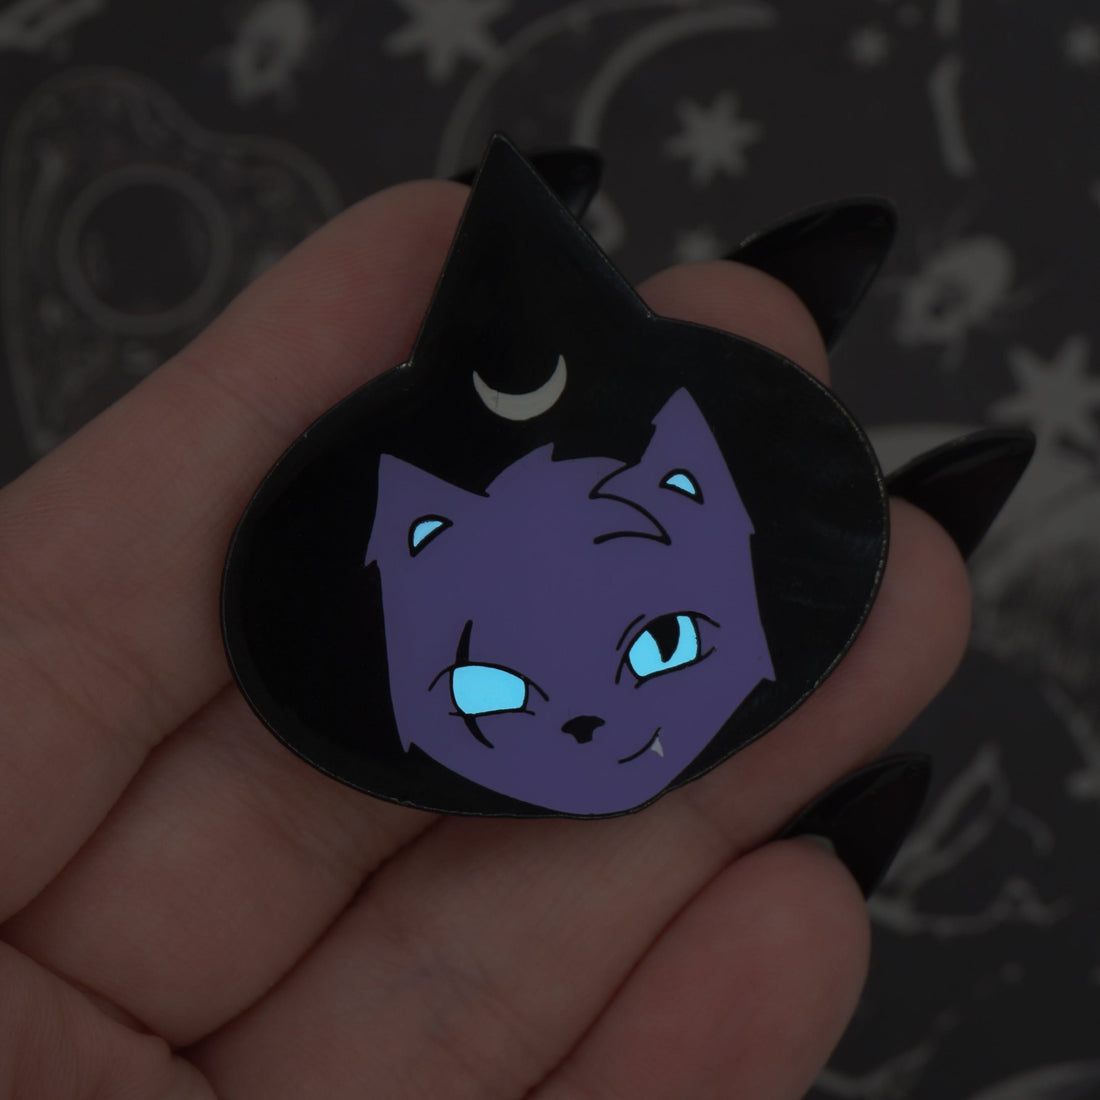 Monster Kitty Society Pins Standard GLOW IN THE DARK - Purple Witch Cat "Runa" - Dyed Soft Enamel Pin